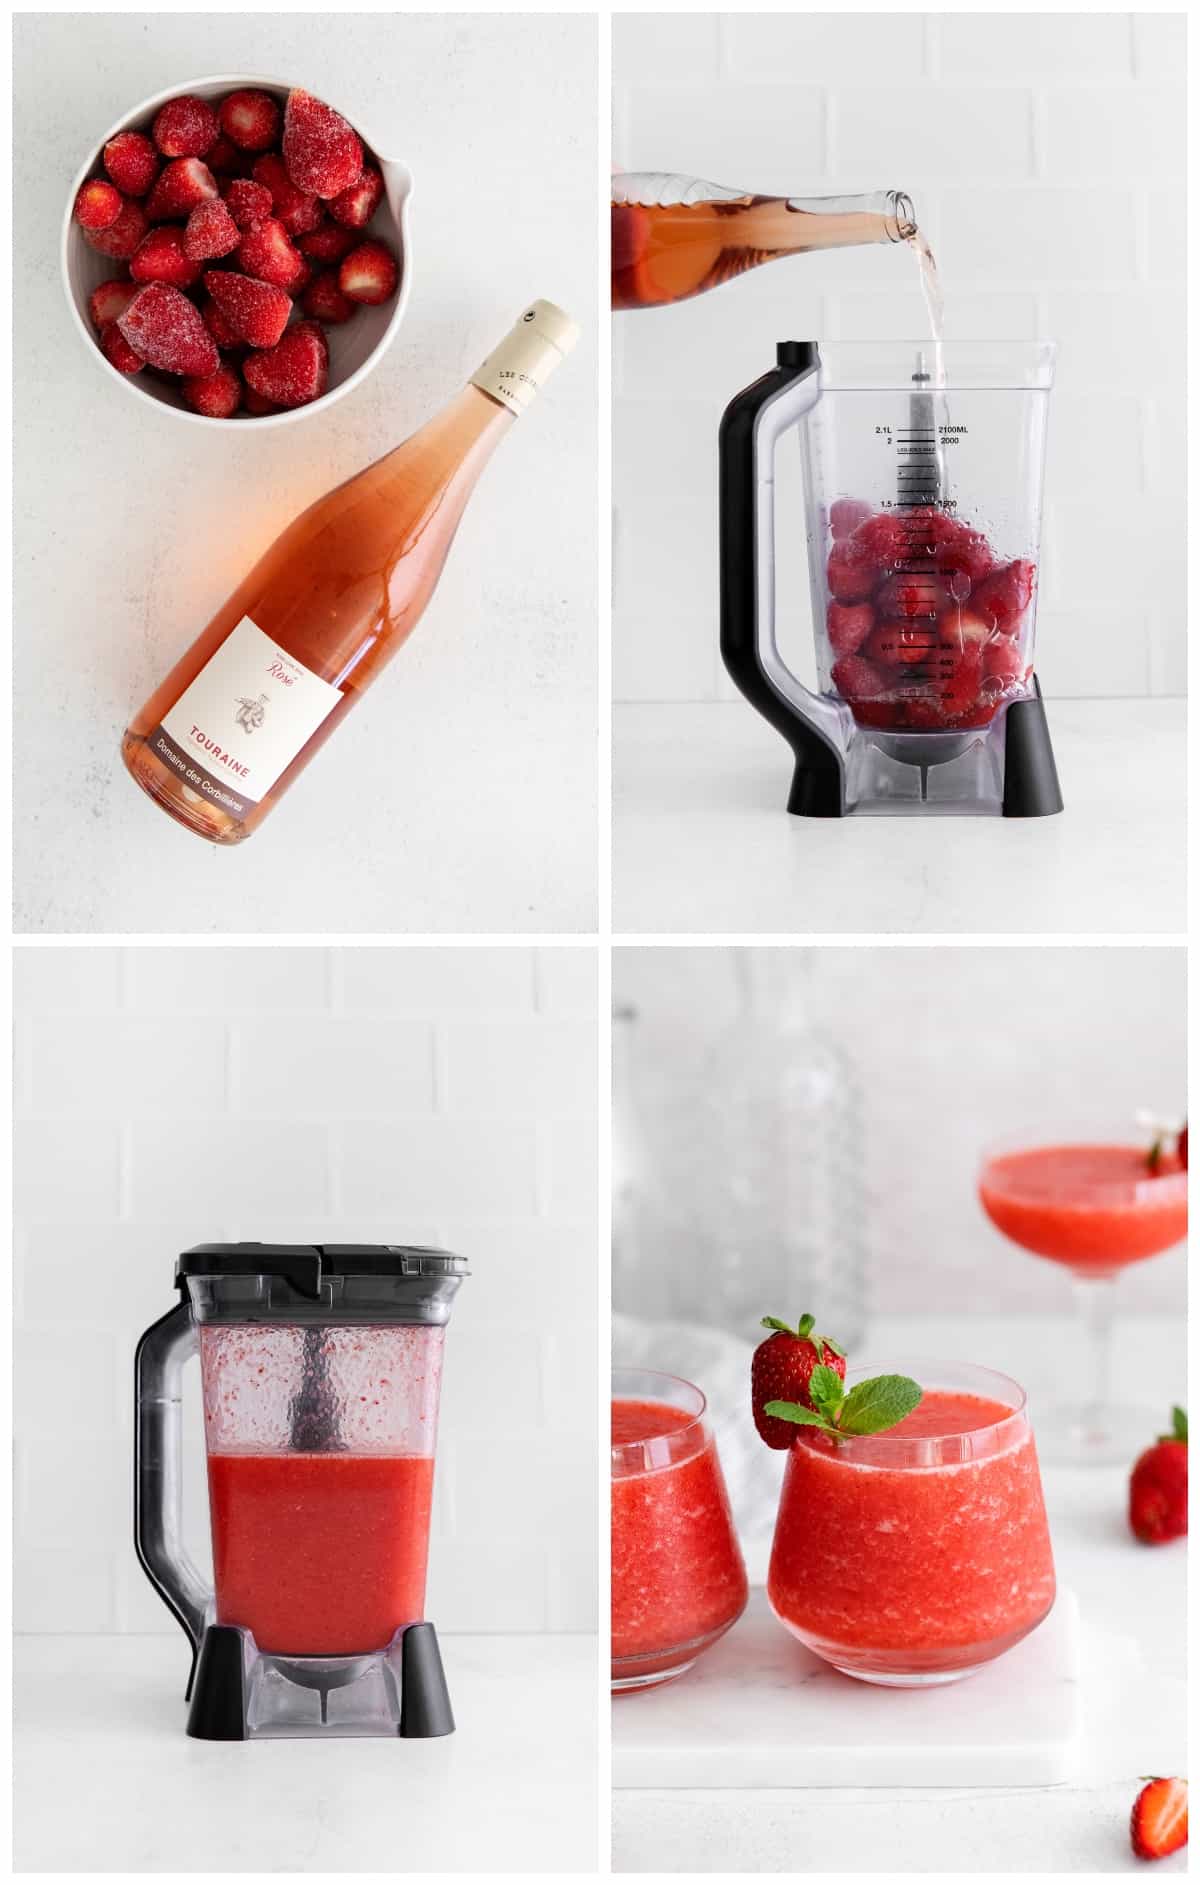 how to make strawberry frose step by step photo instructions